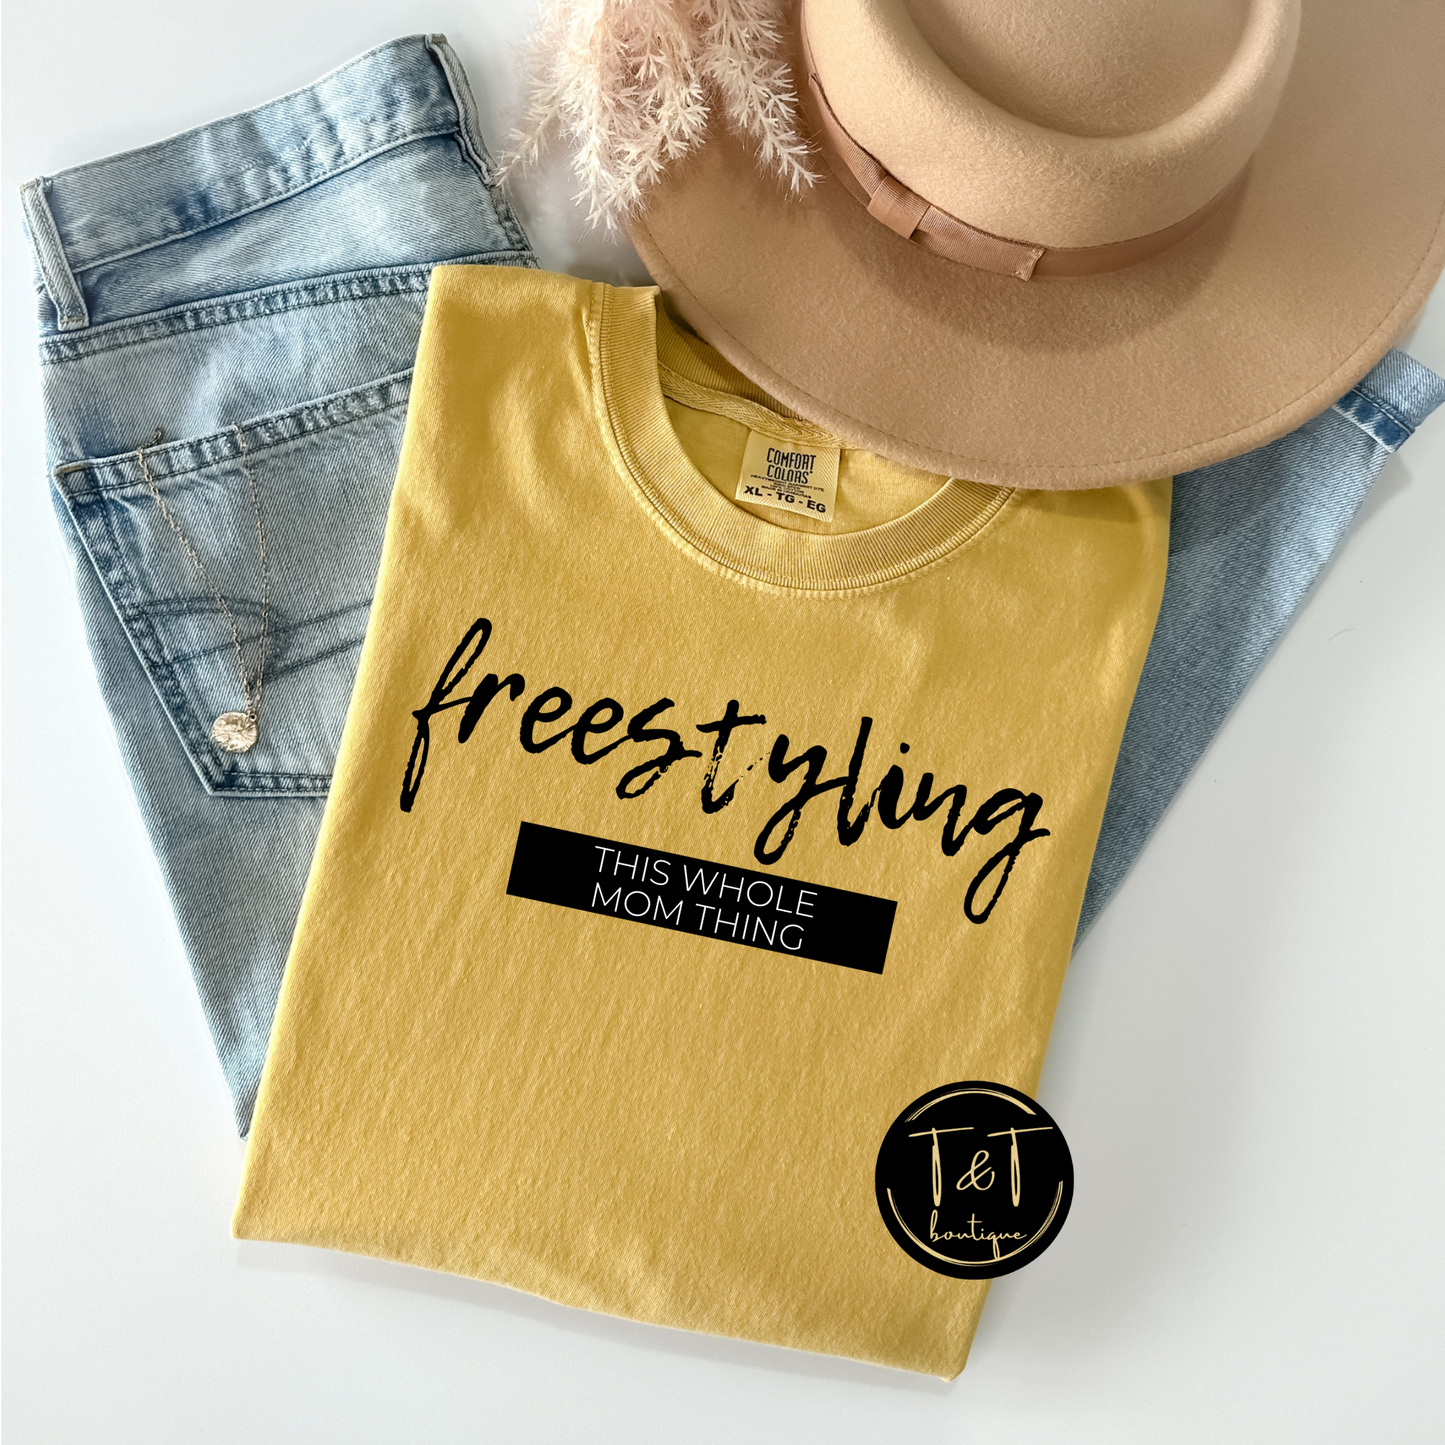 Freestyling this whole mom thing tee